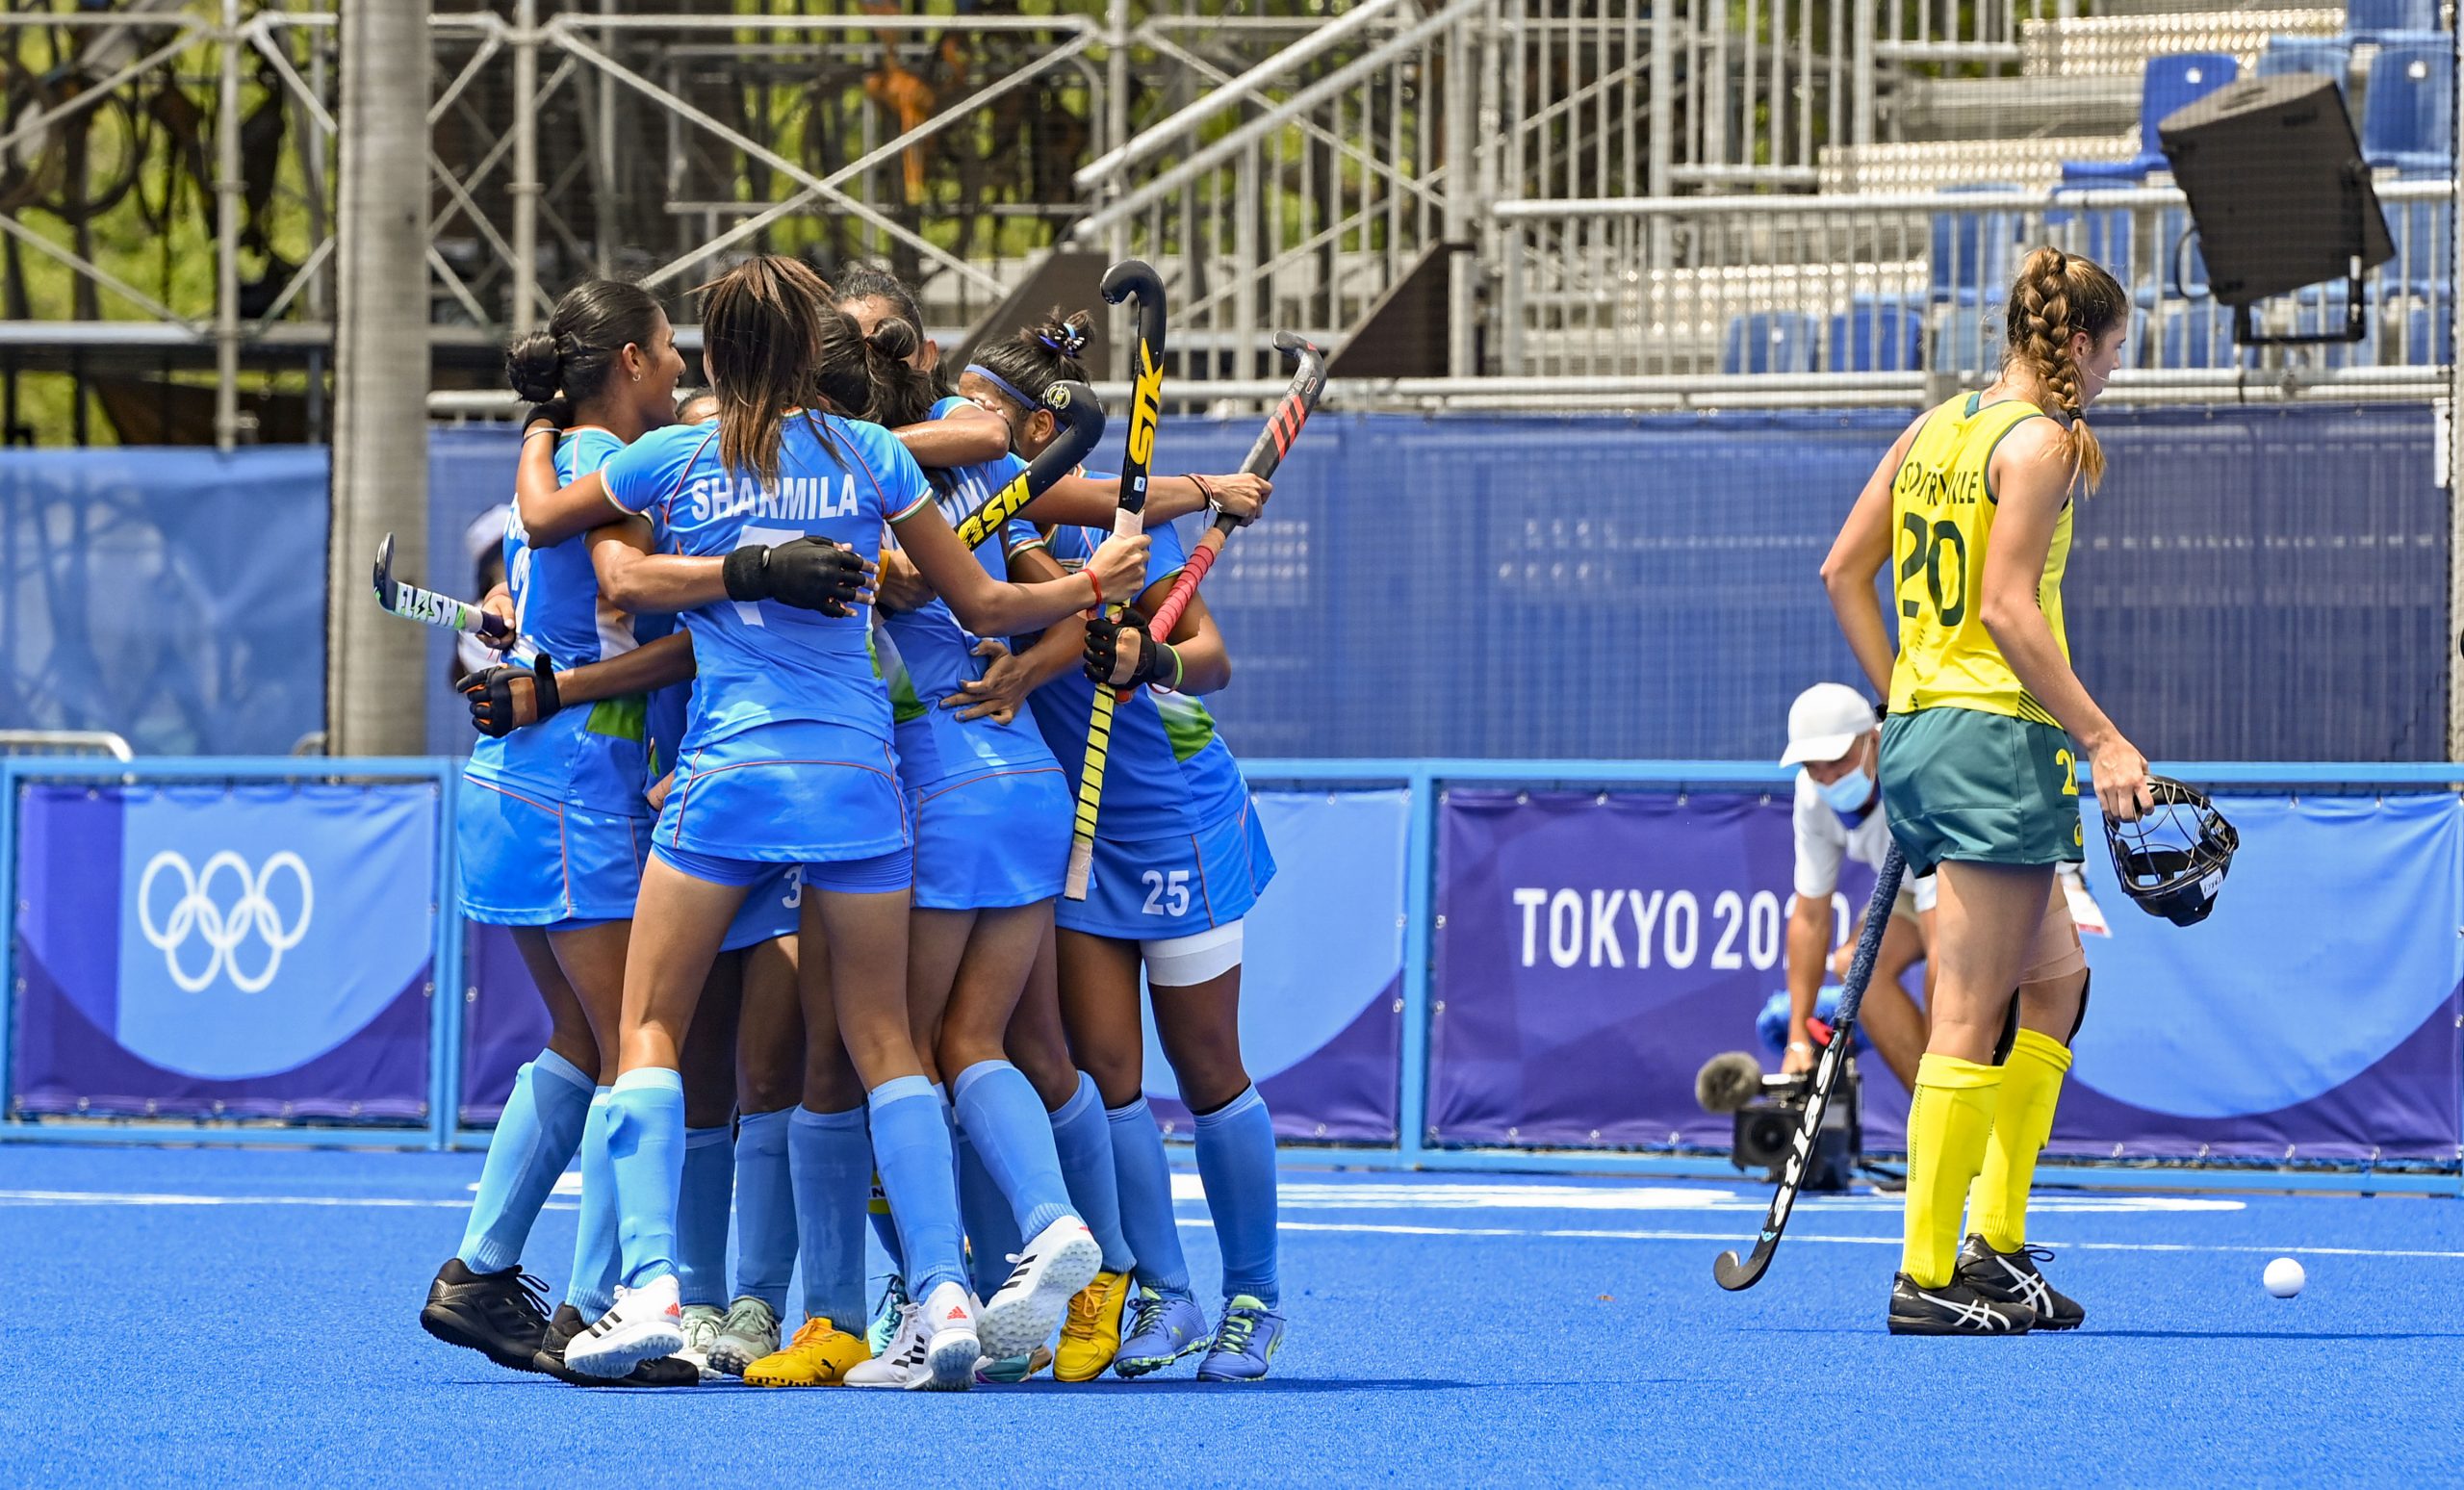 Tokyo Olympics: After Australia, Indian eves eye historic win against Argentina